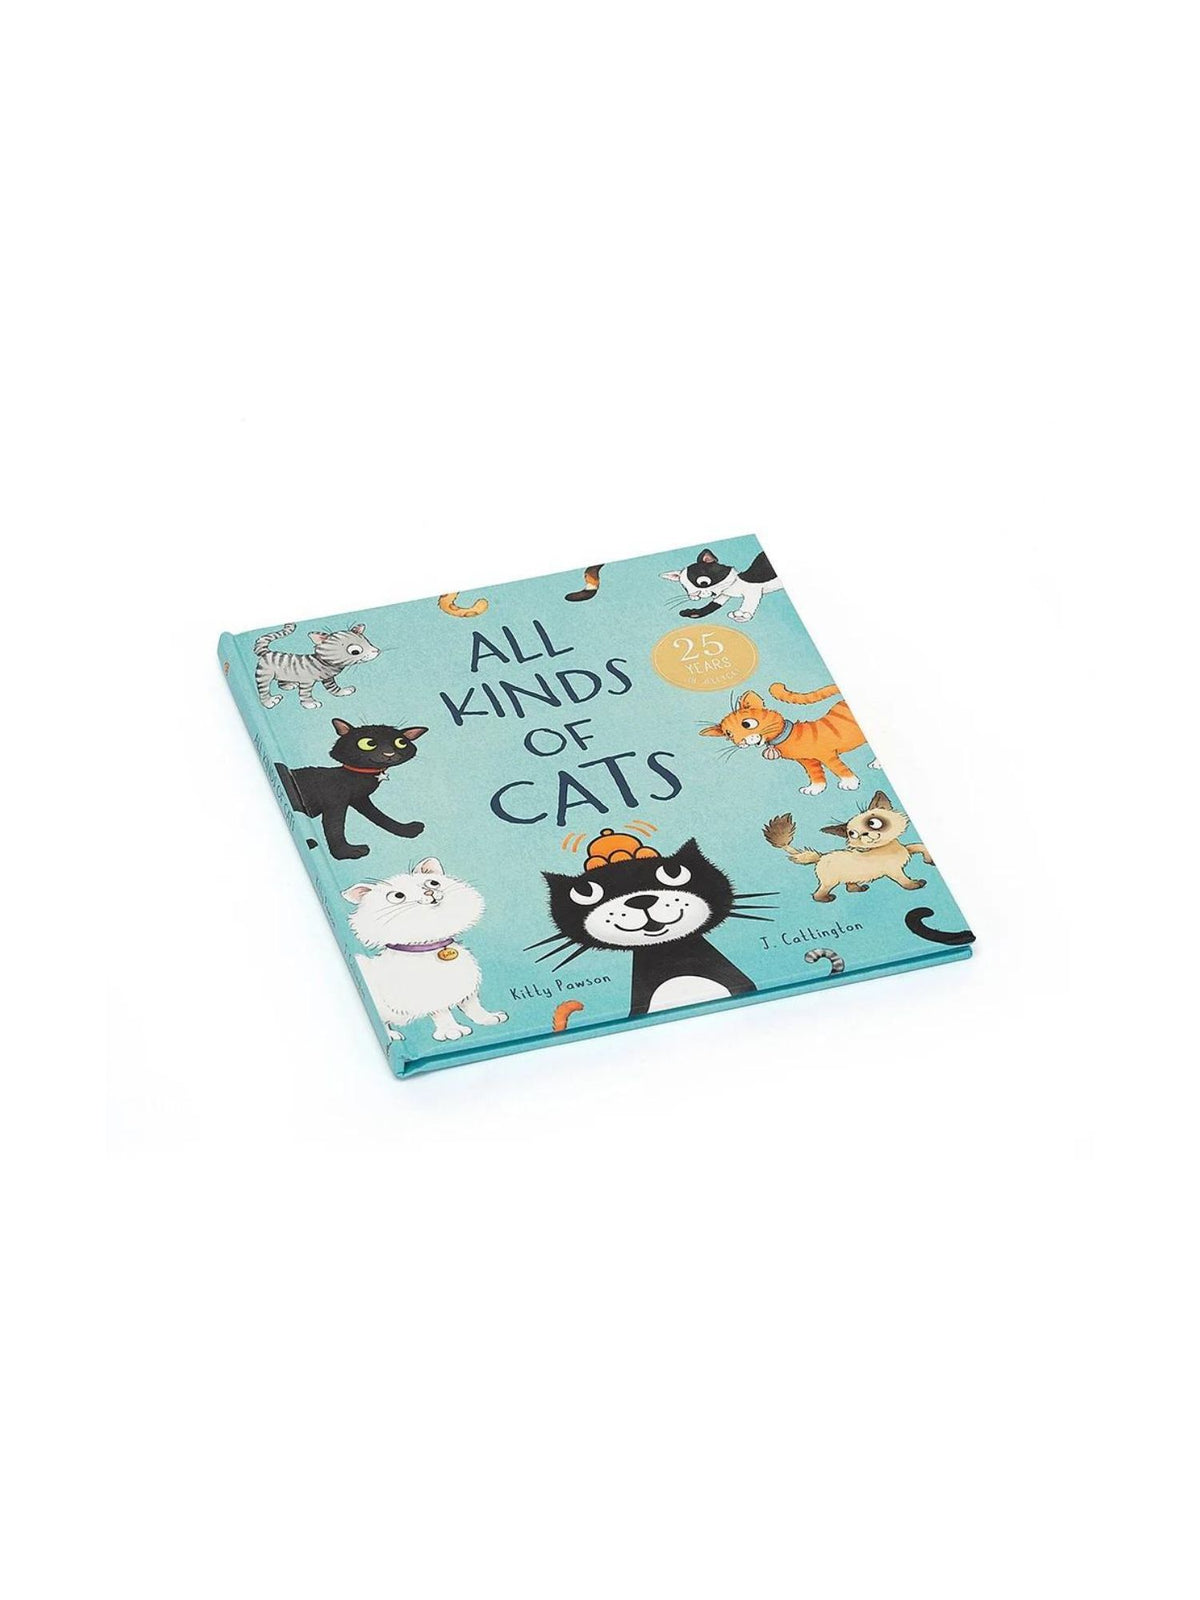 jellycat all kinds of cats book